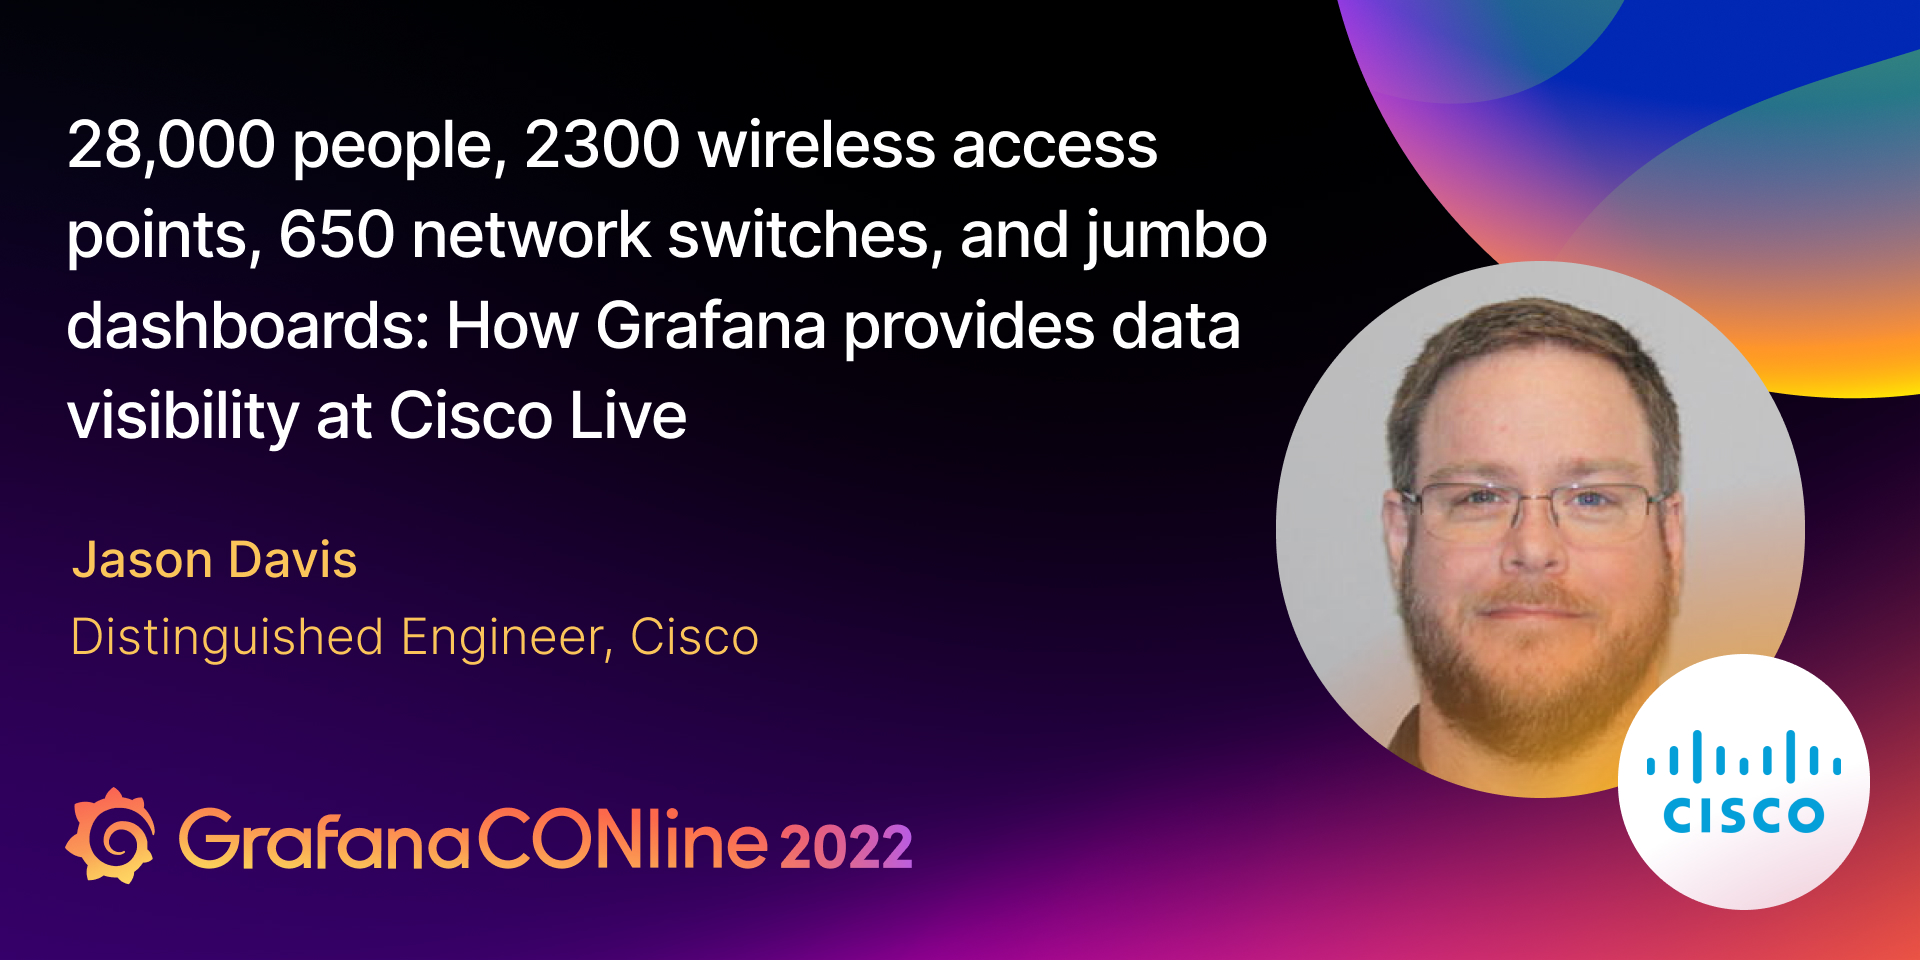 28,000 people, 2300 wireless access points, 650 network switches, and jumbo dashboards: How Grafana provides data visibility at Cisco Live